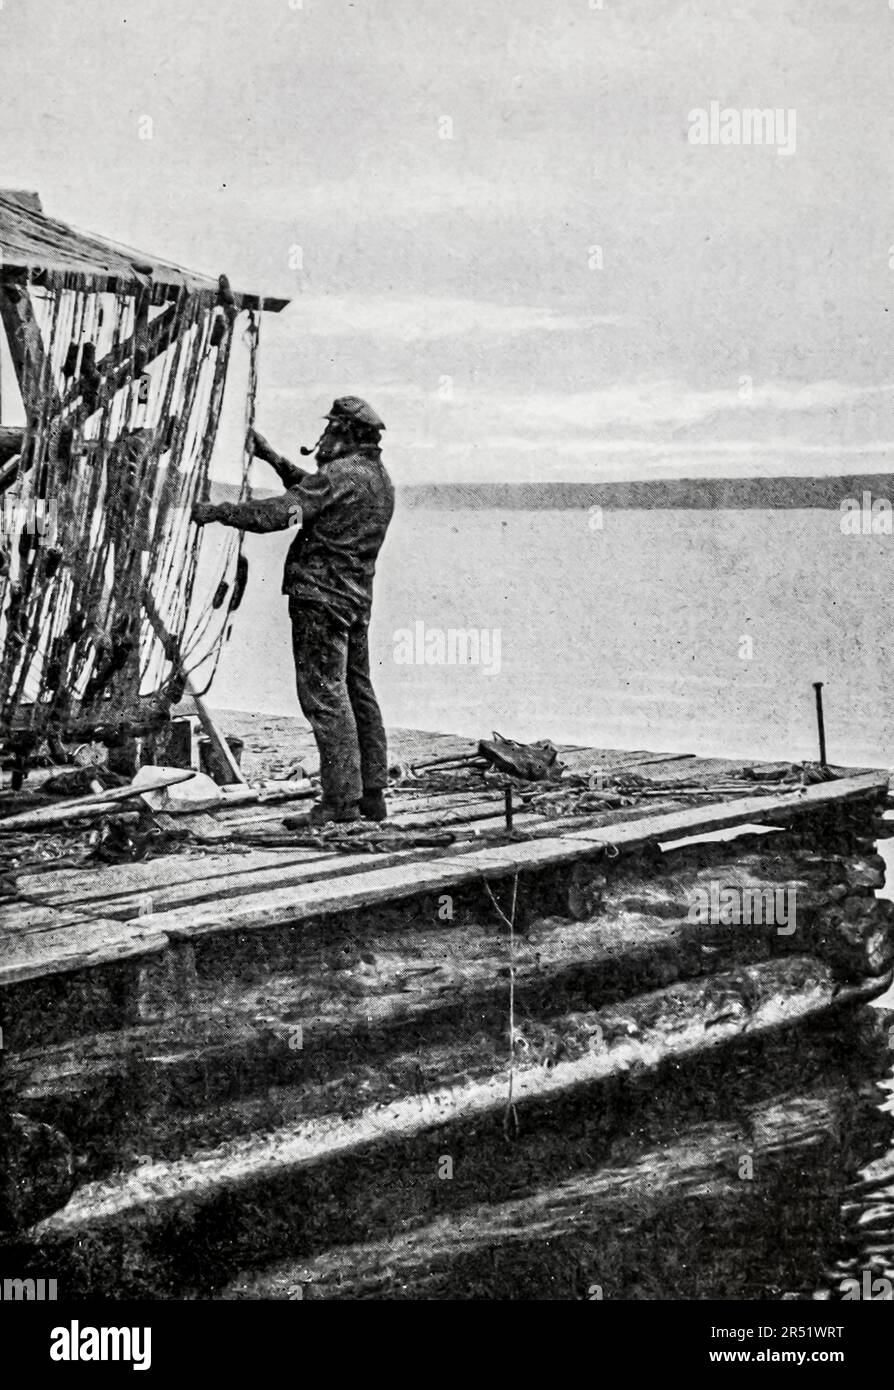 https://c8.alamy.com/comp/2R51WRT/examining-the-fishing-nets-black-and-white-photography-by-clifton-johnson-from-the-book-highways-and-byways-of-the-great-lakes-publication-date-1911-publisher-new-york-the-macmillan-company-london-macmillan-and-co-ltd-2R51WRT.jpg